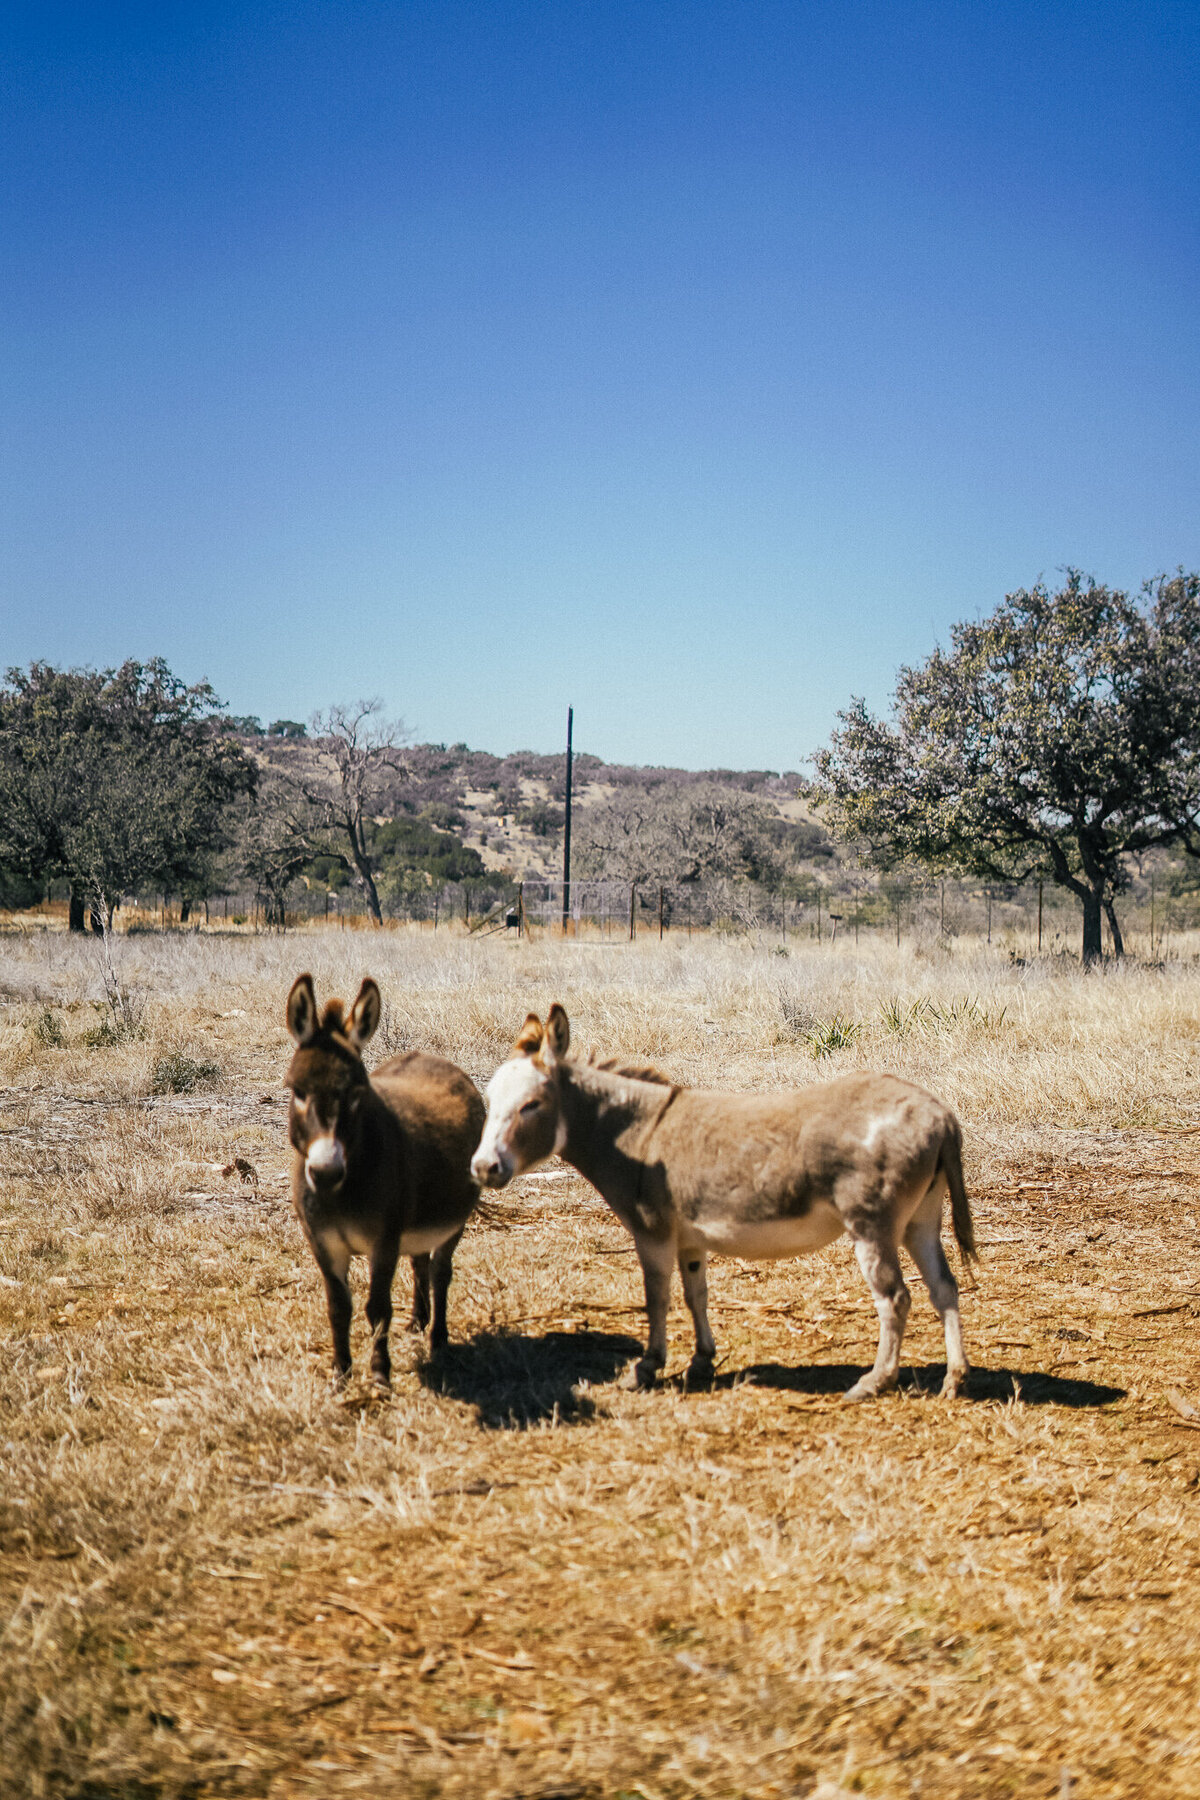 Two donkeys standing outside in the grass